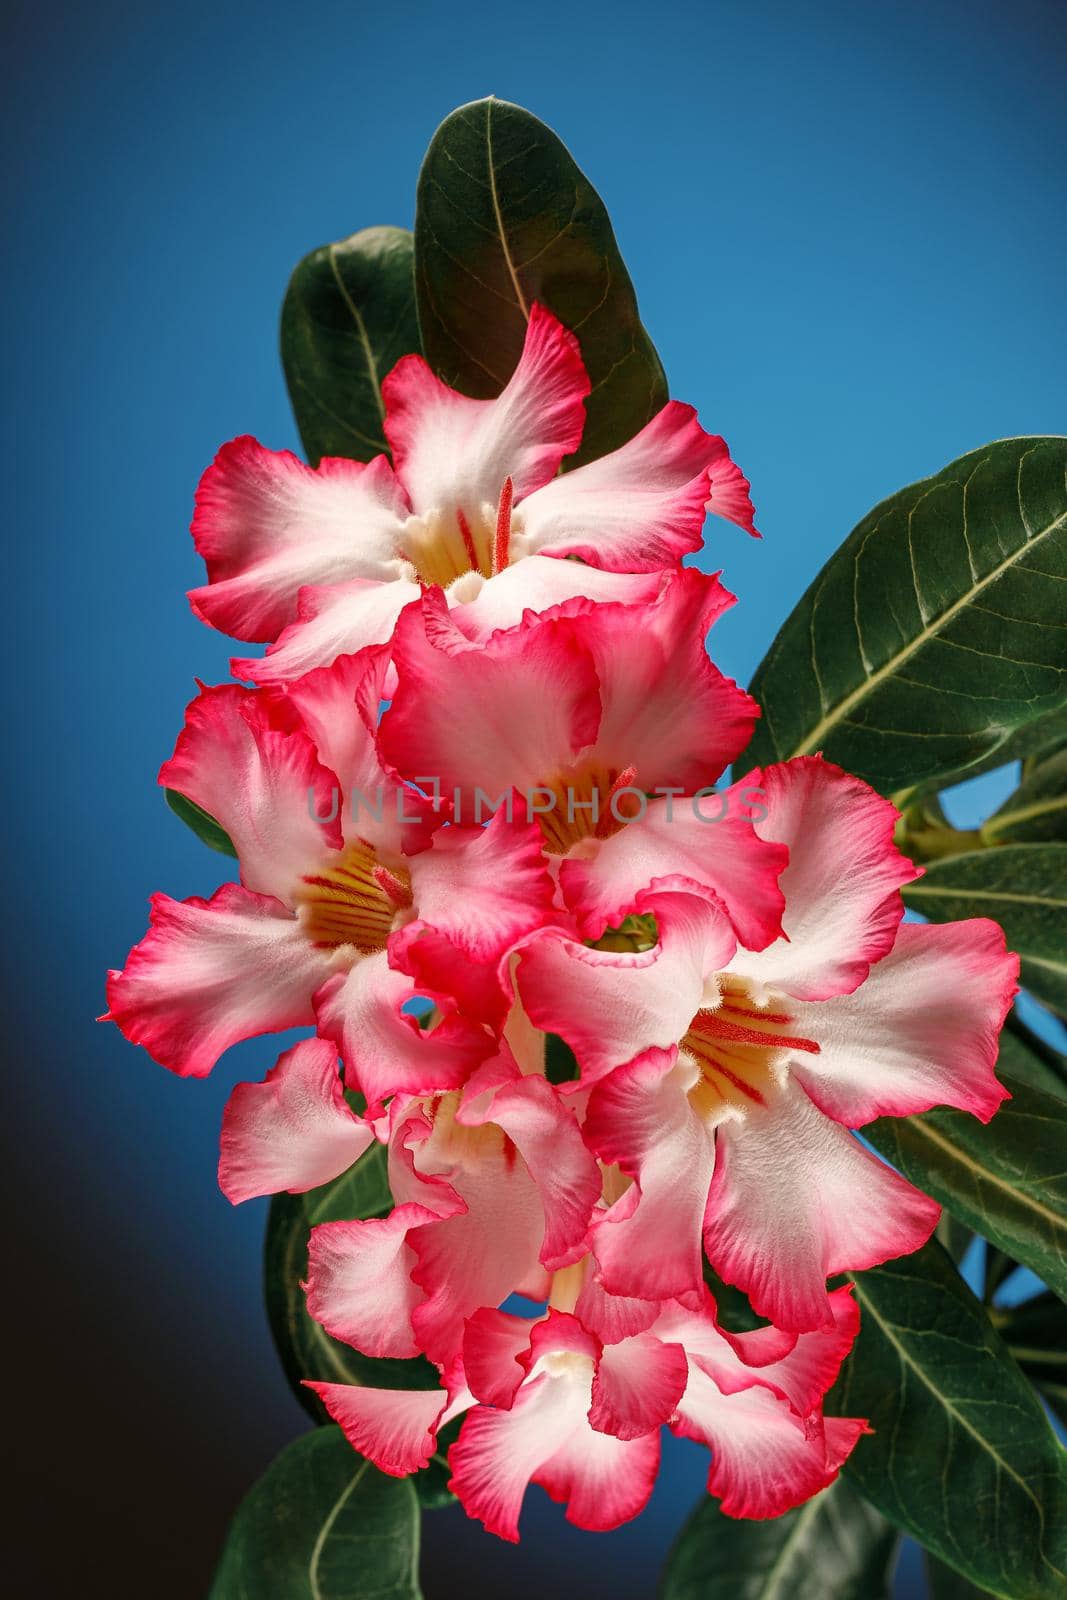 Beautiful Desert rose flower in the garden with blurry green leaf in the background, Mock azalea flowers, Impala lily flower. Blue turquoise background